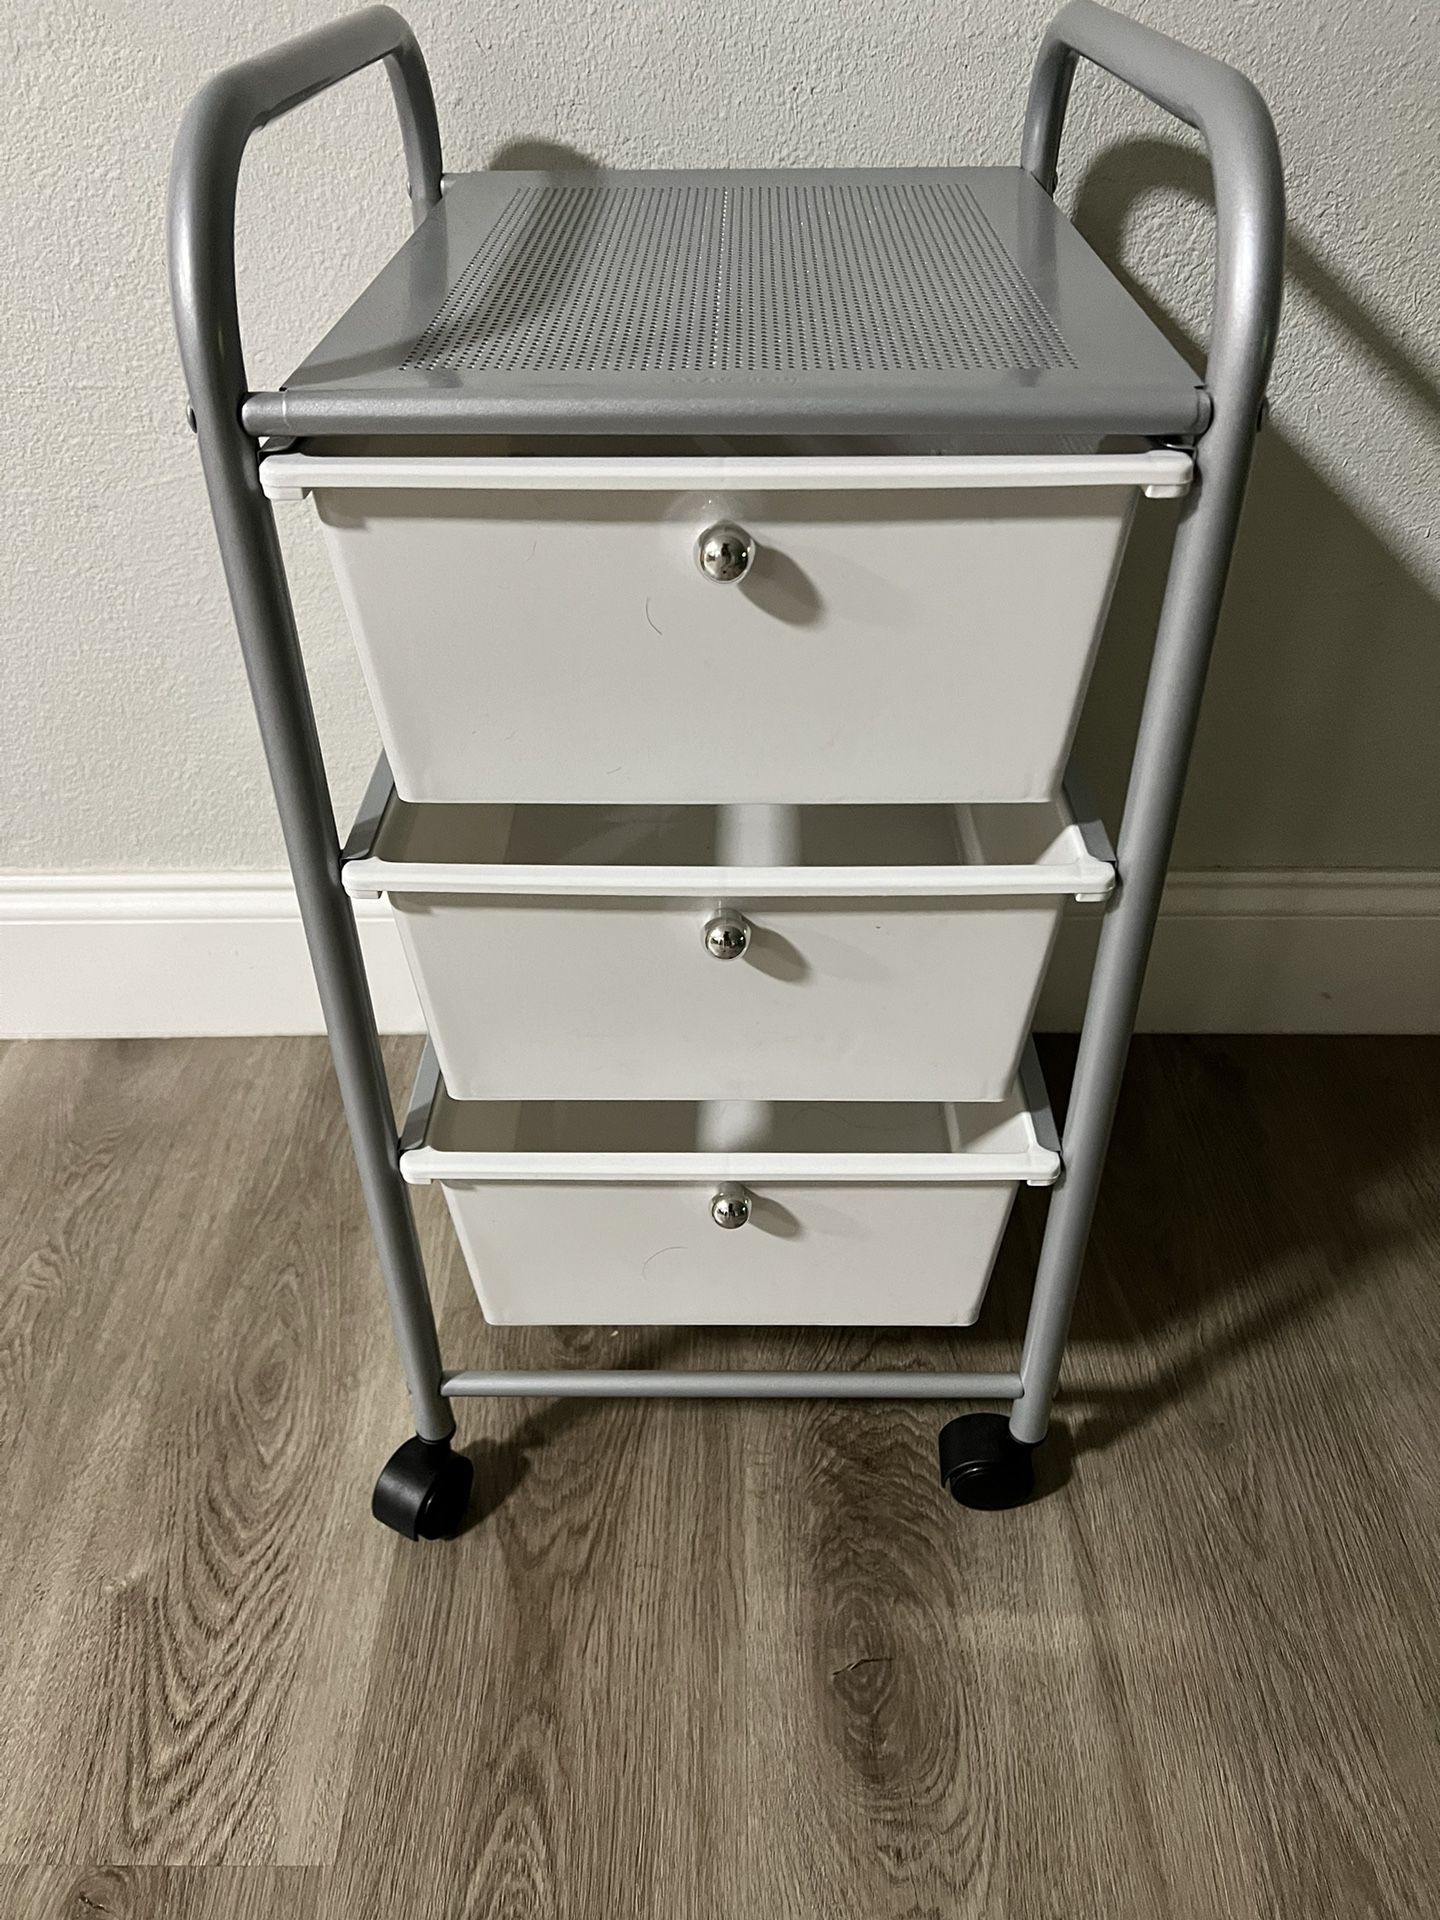 Plastic Drawers With Wheels (4)